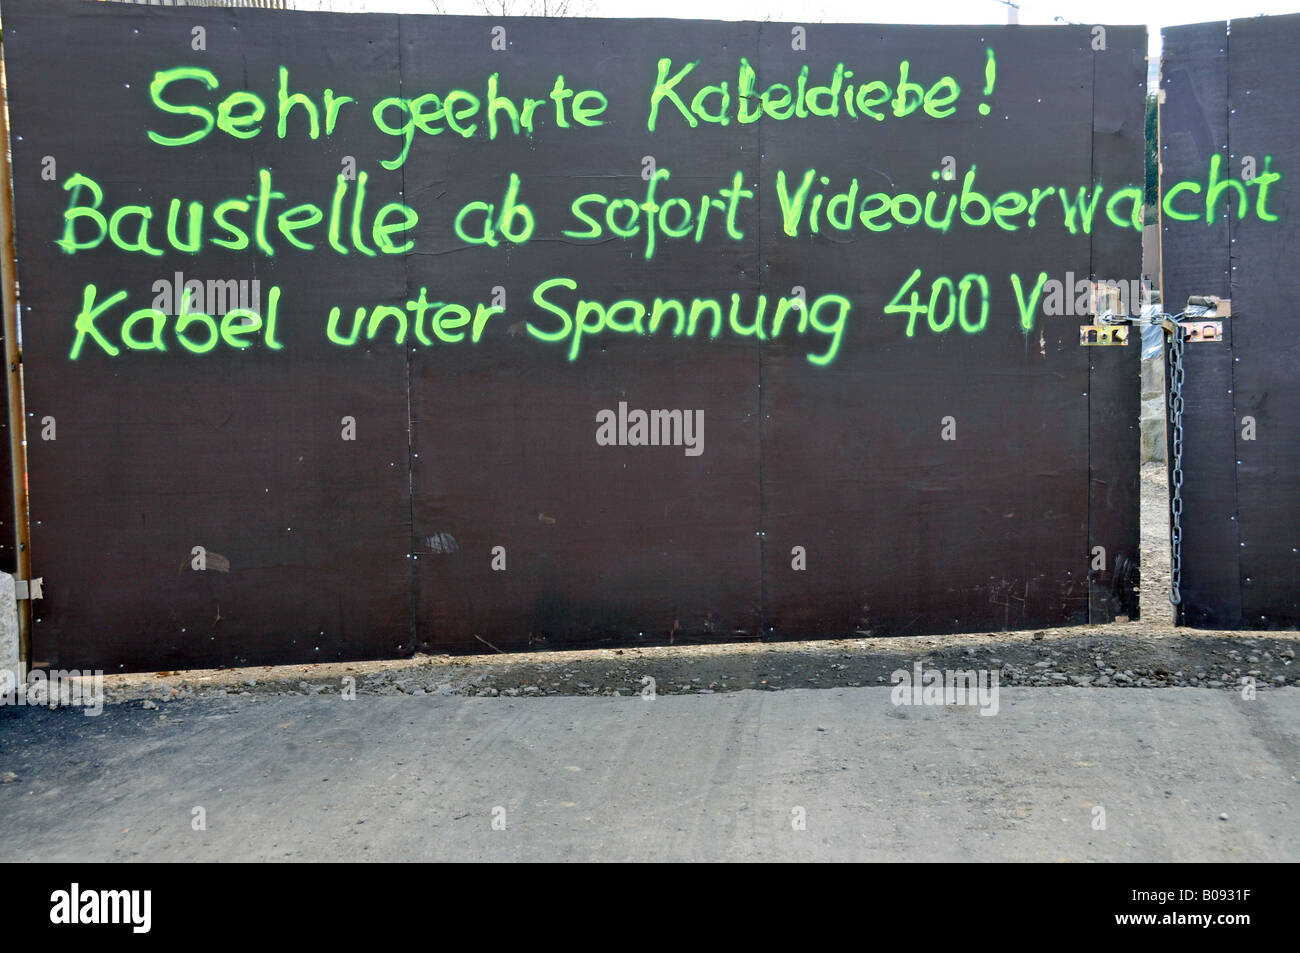 Closed-off construction site, sign warning of video surveillance to prevent theft, Cologne, North Rhine-Westphalia, Germany Stock Photo